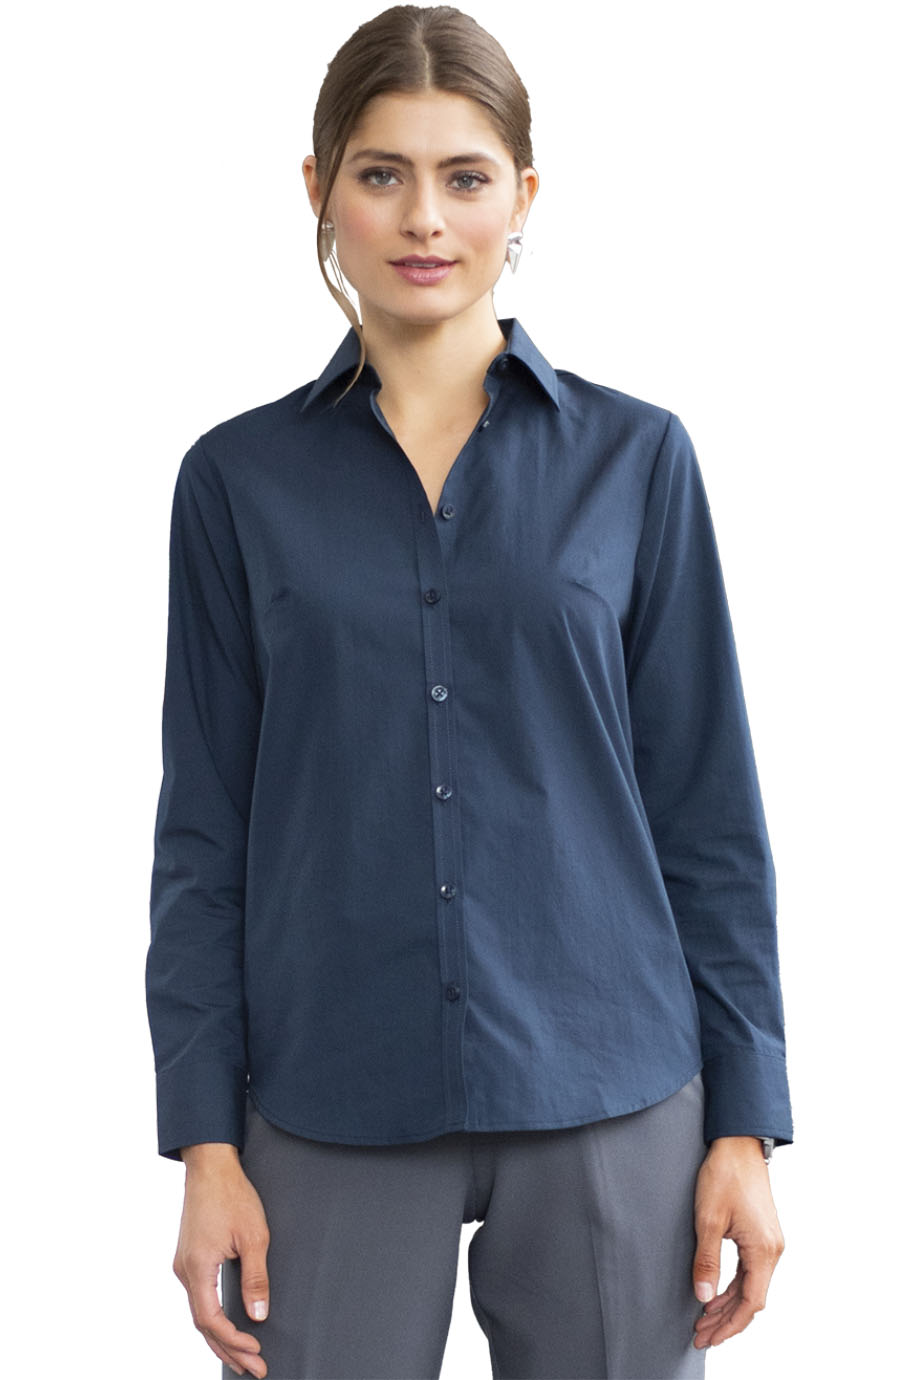 ESSENTIAL BROADCLOTH BLOUSE